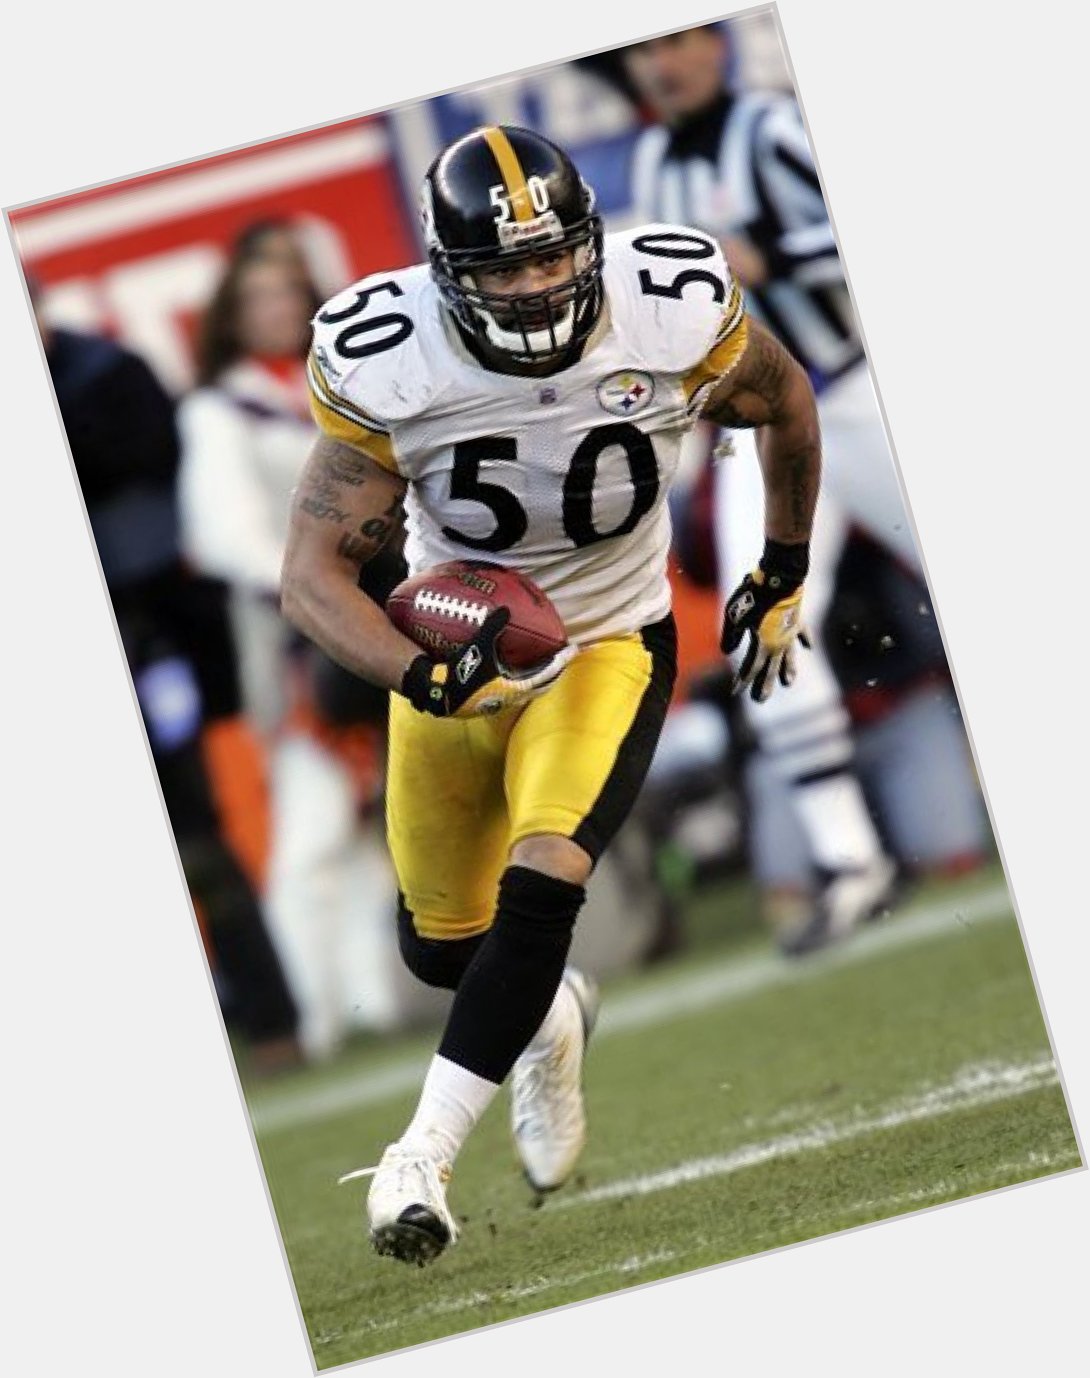 Happy Birthday to Larry Foote! Luv those STEELERS! 